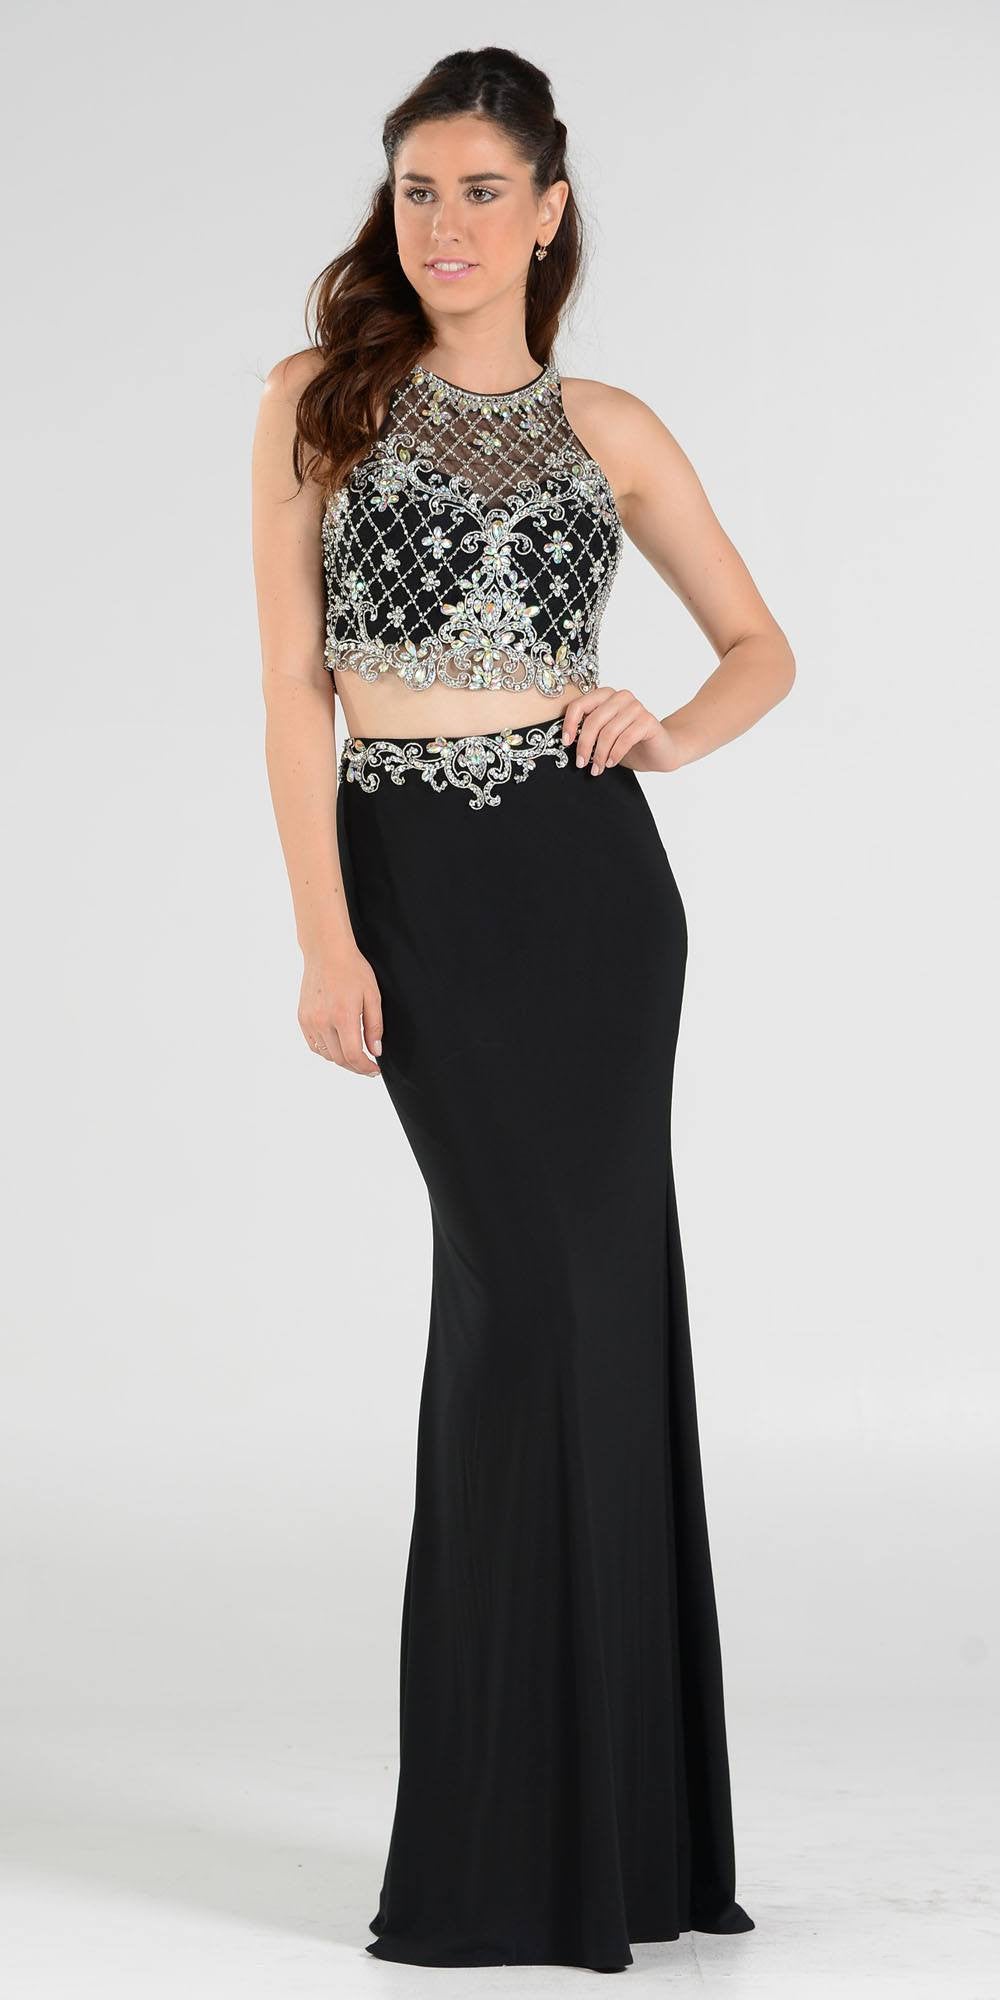 Two Piece Black Prom Gown With Embellished Crop Top And